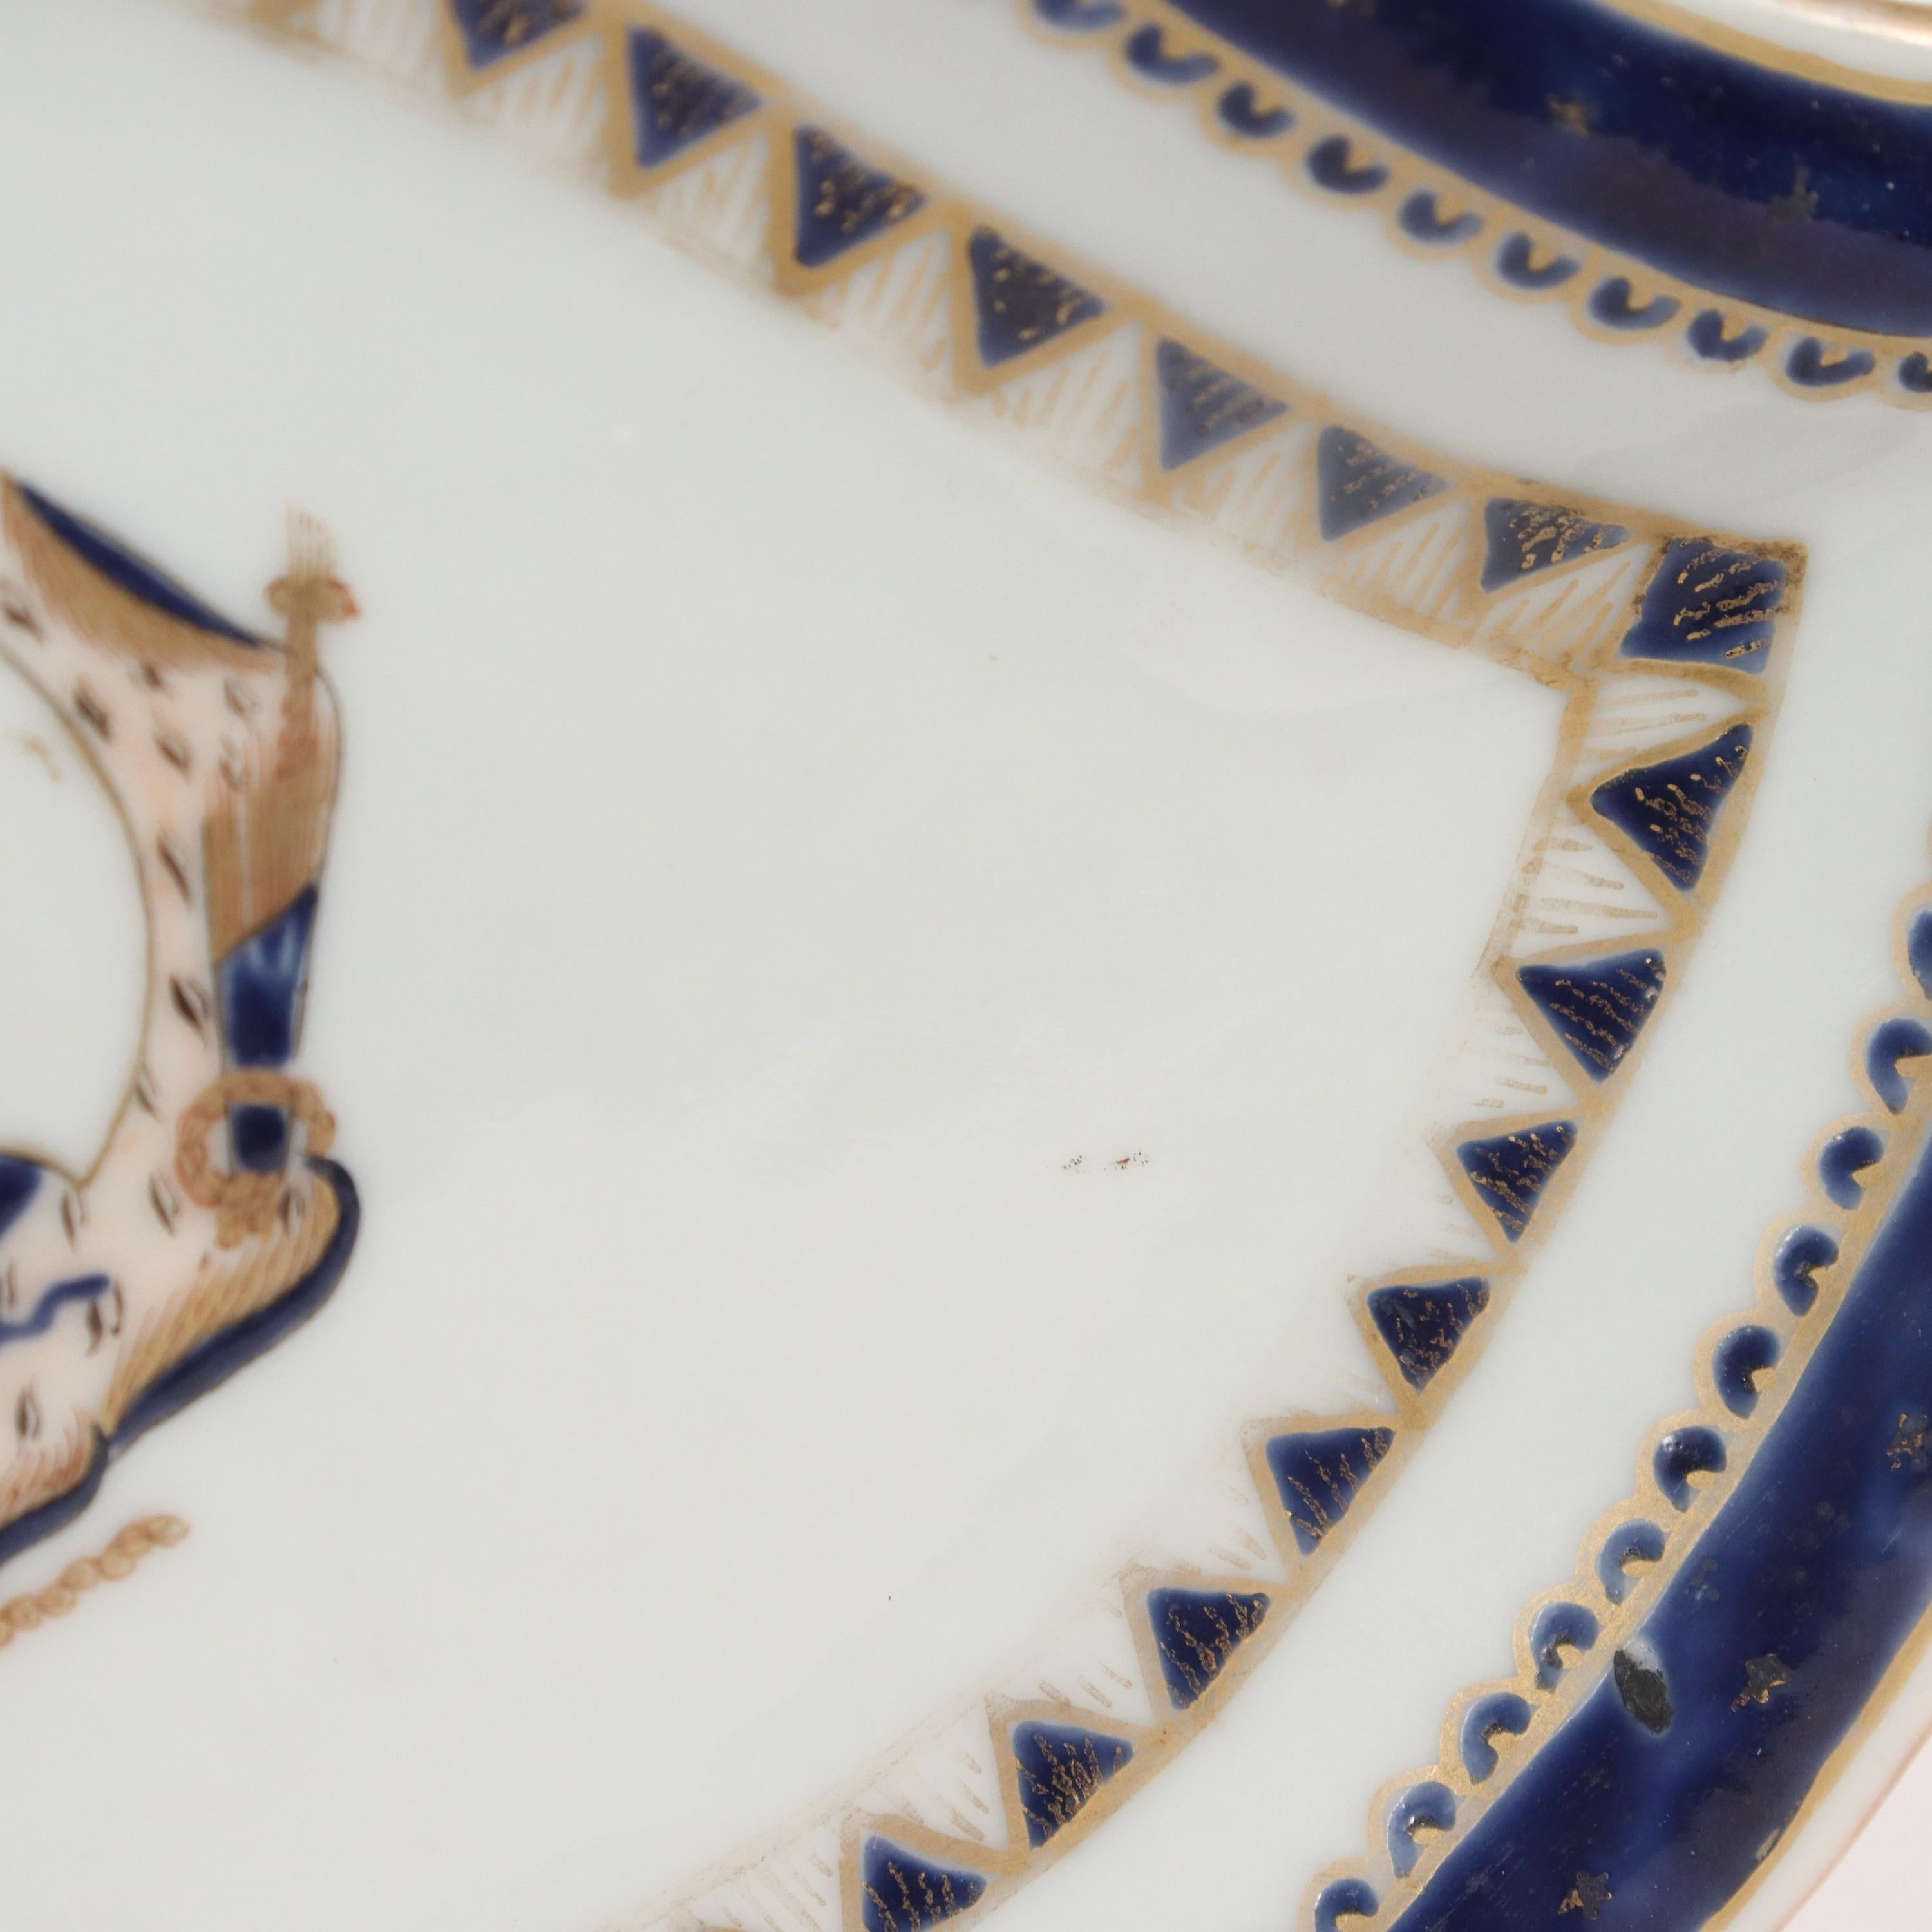 Old or Antique Chinese Export Porcelain Armorial Tobacco Leaf Form Dish / Plate For Sale 9